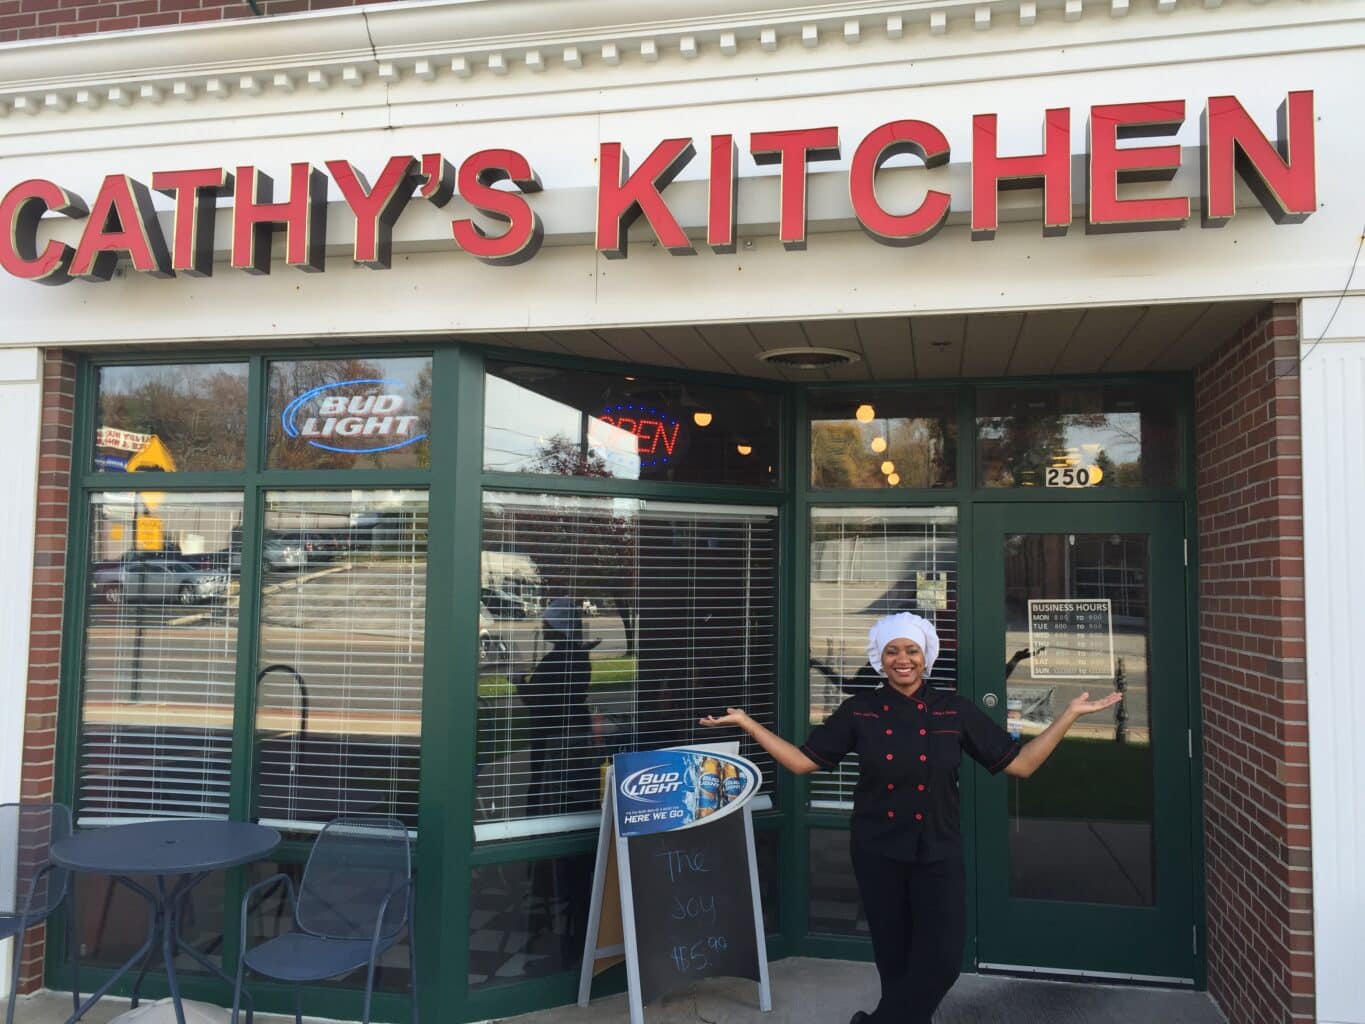 Cathy's Kitchen in Missouri co-founder Cathy Jenkins